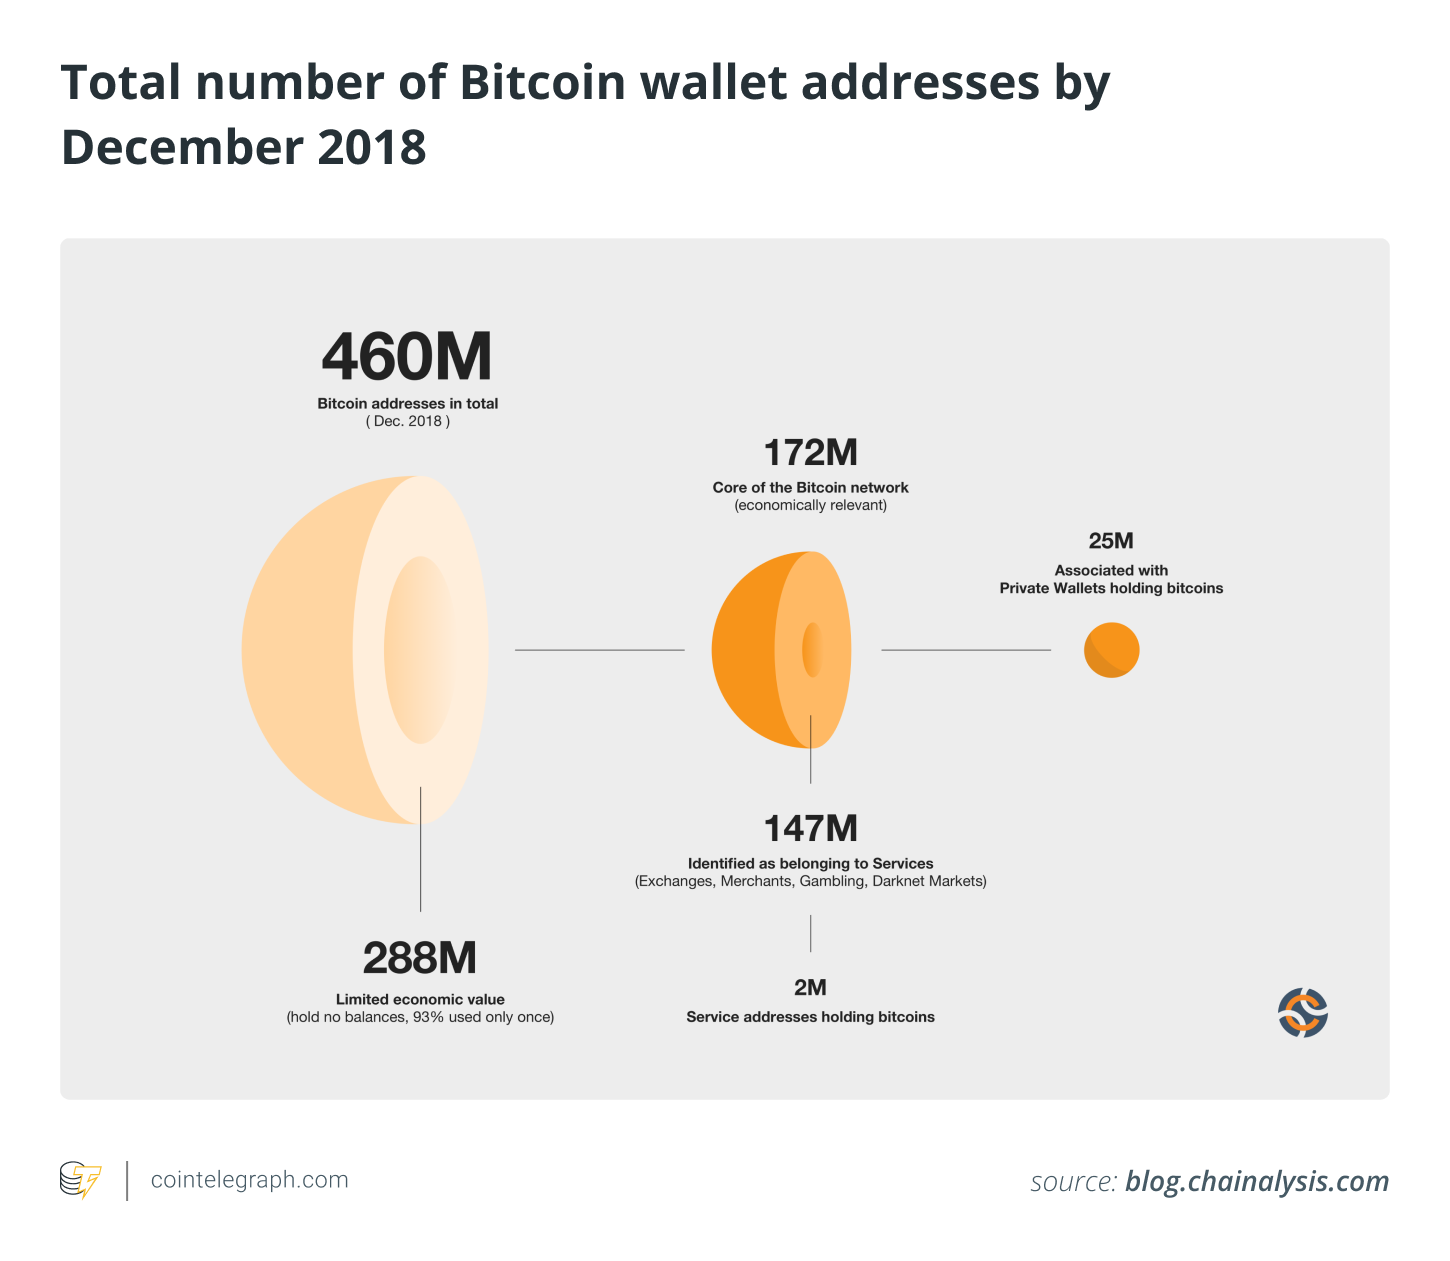 Total number of Bitcoin wallet addresses by December 2018